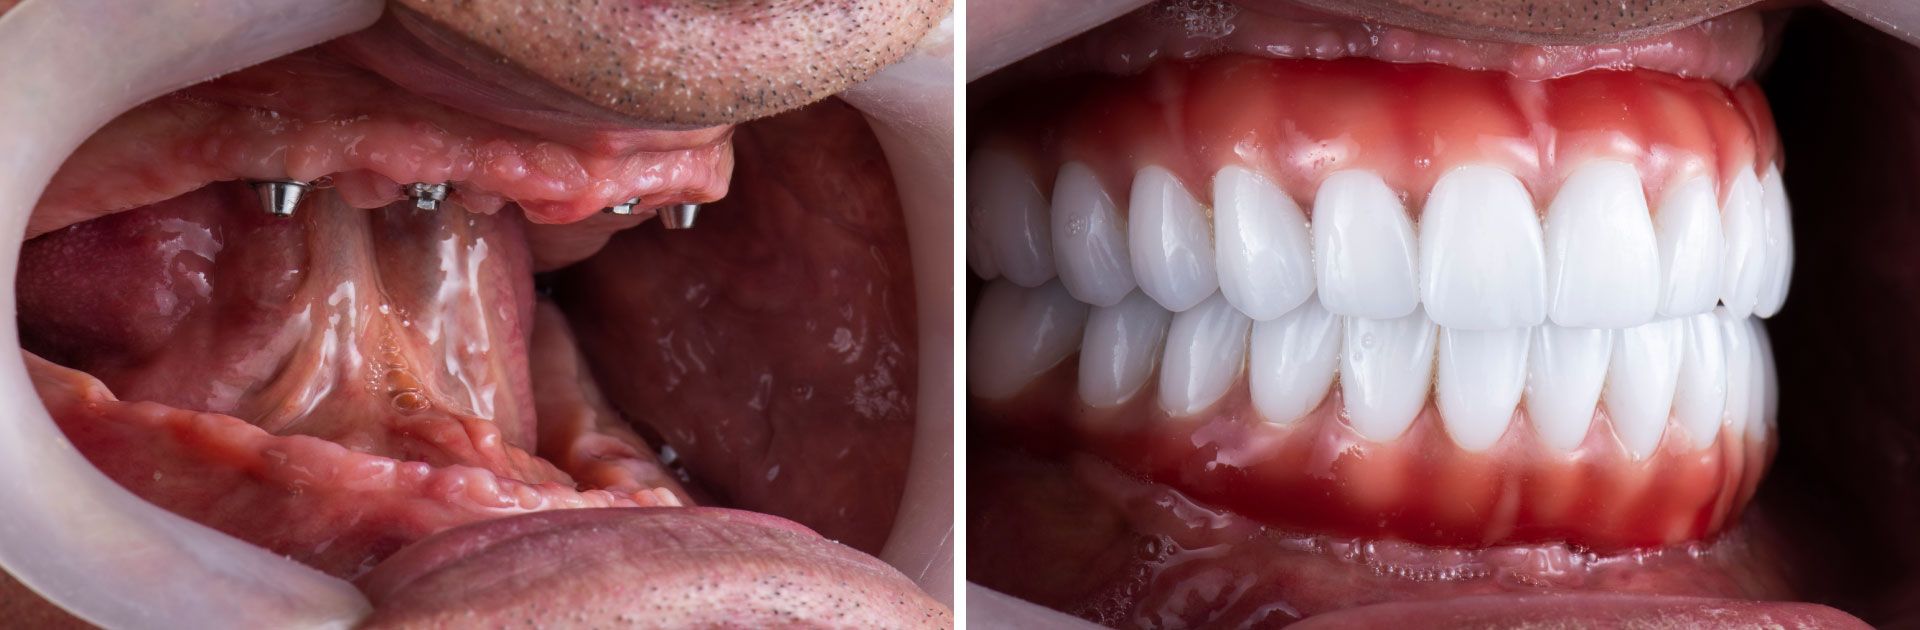 An image of a patient's teeth before and after dental implants